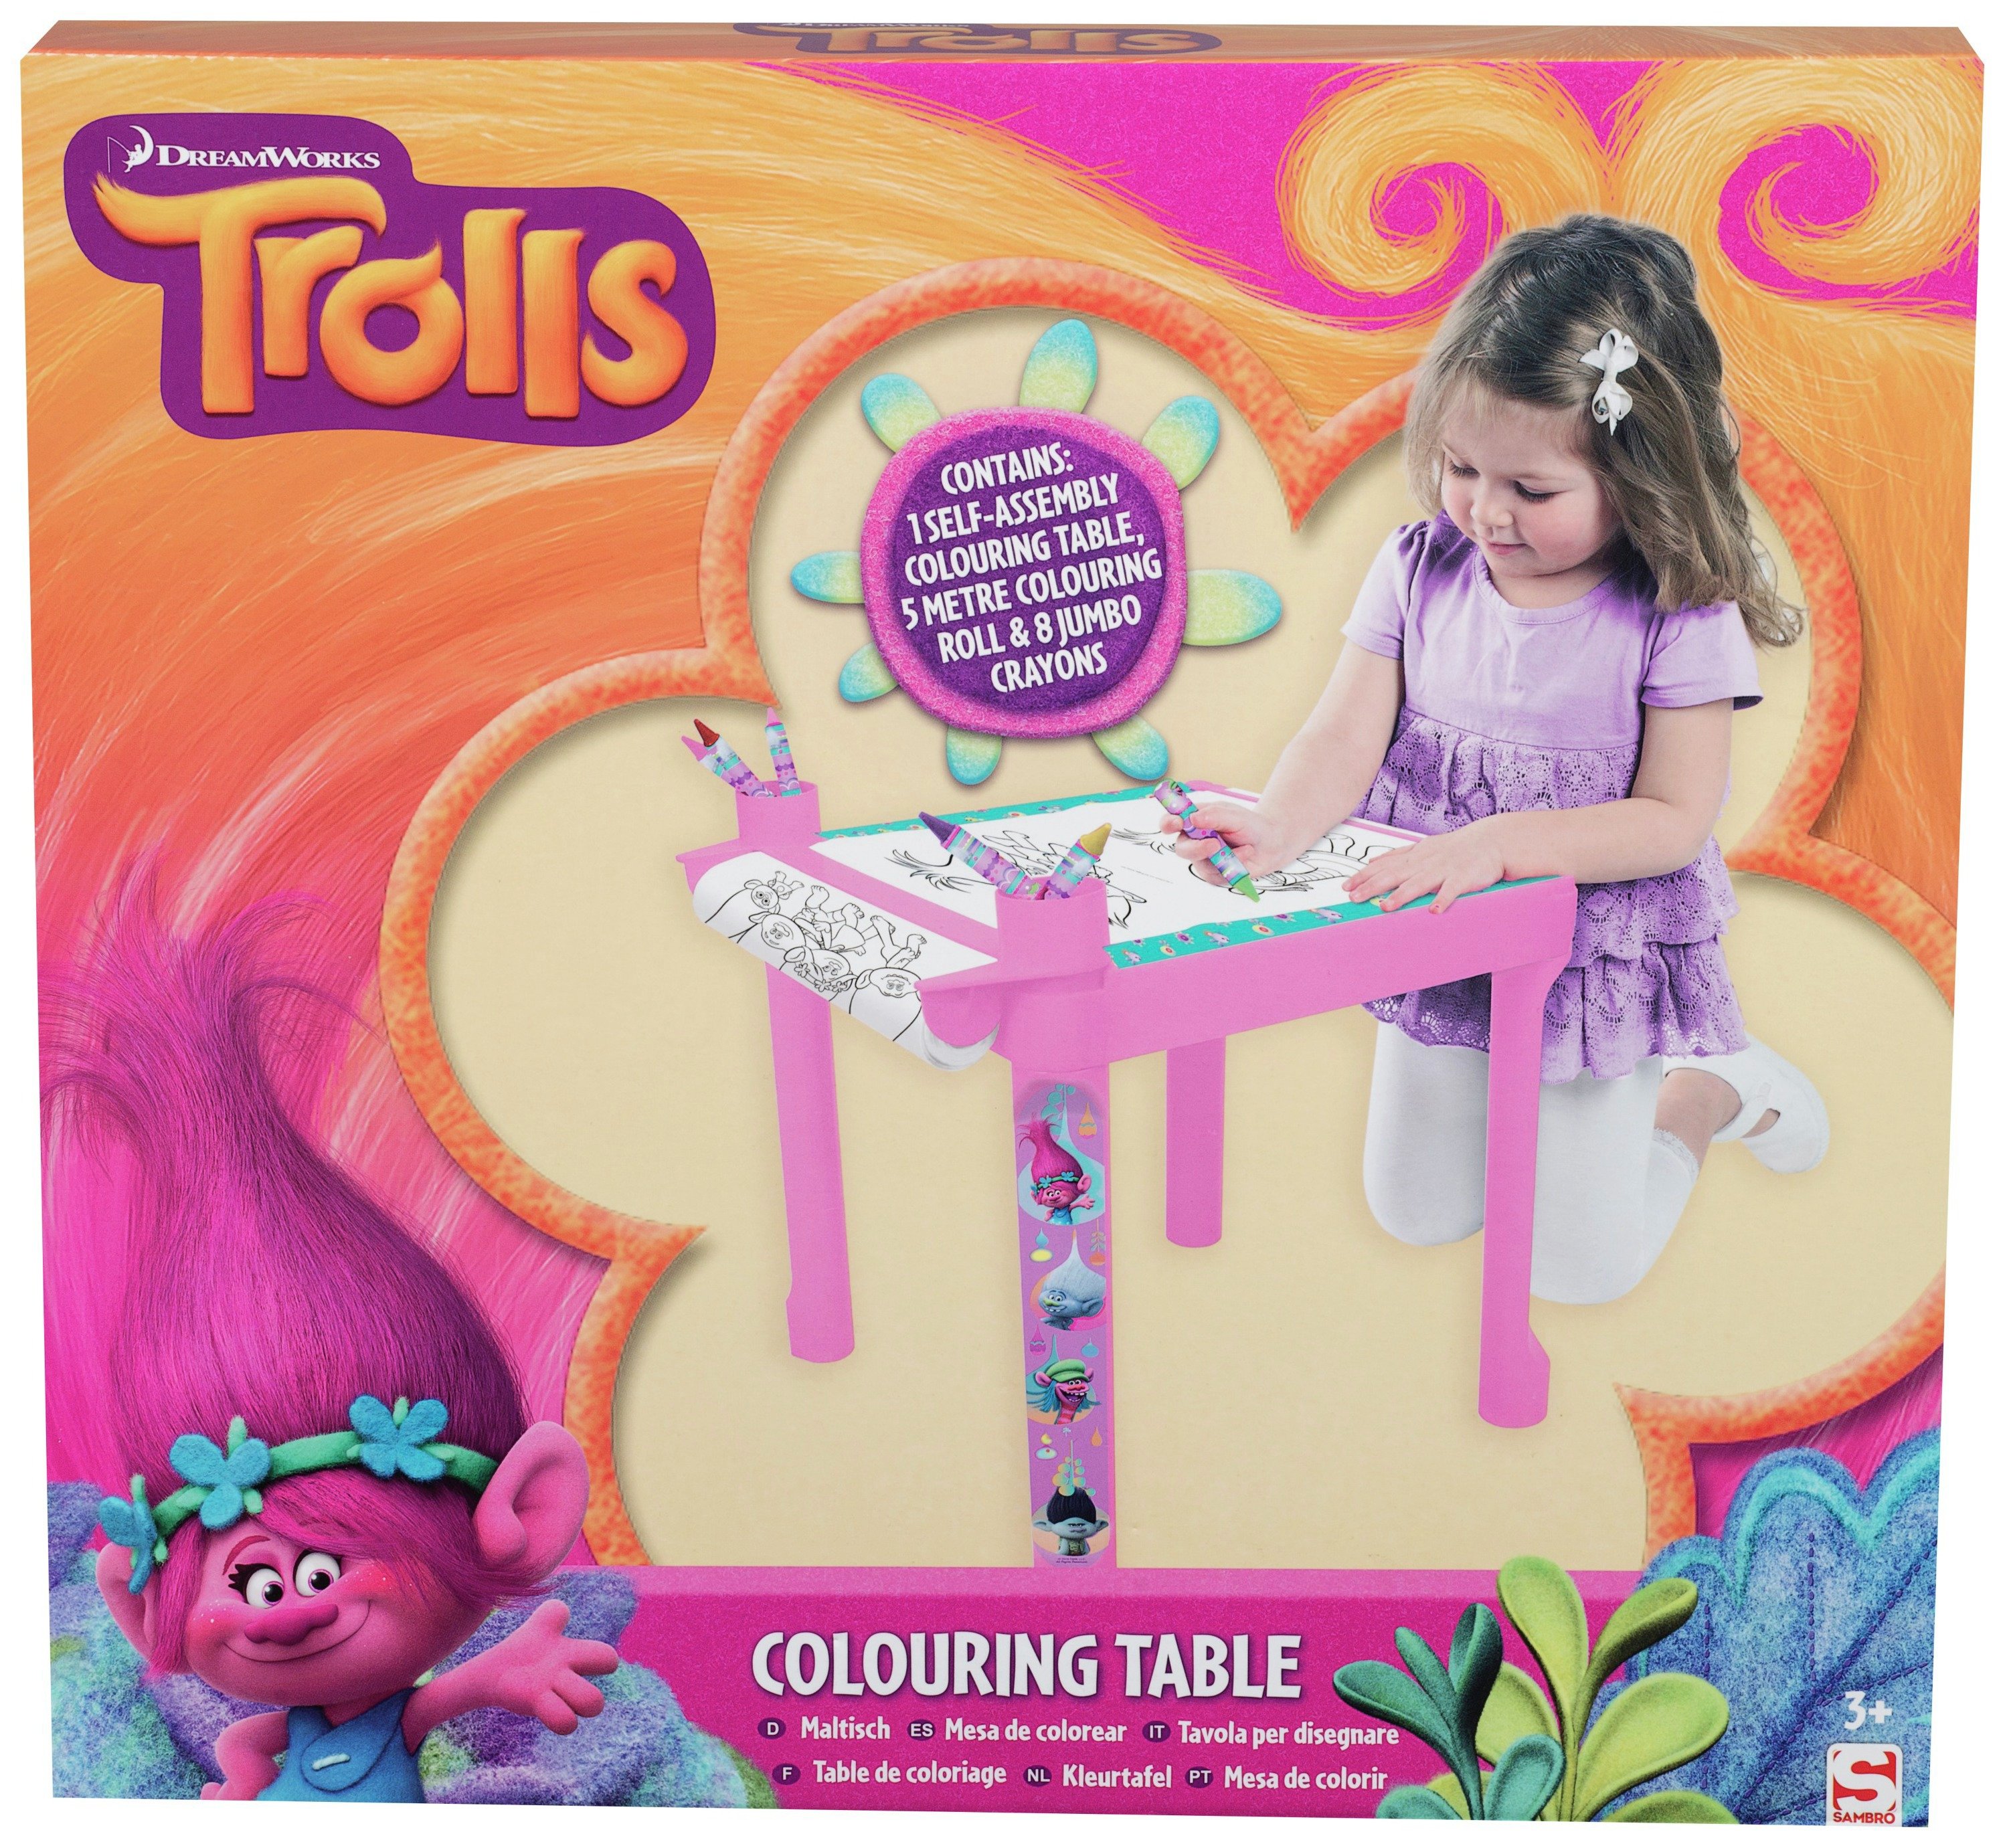 Trolls Colouring Table